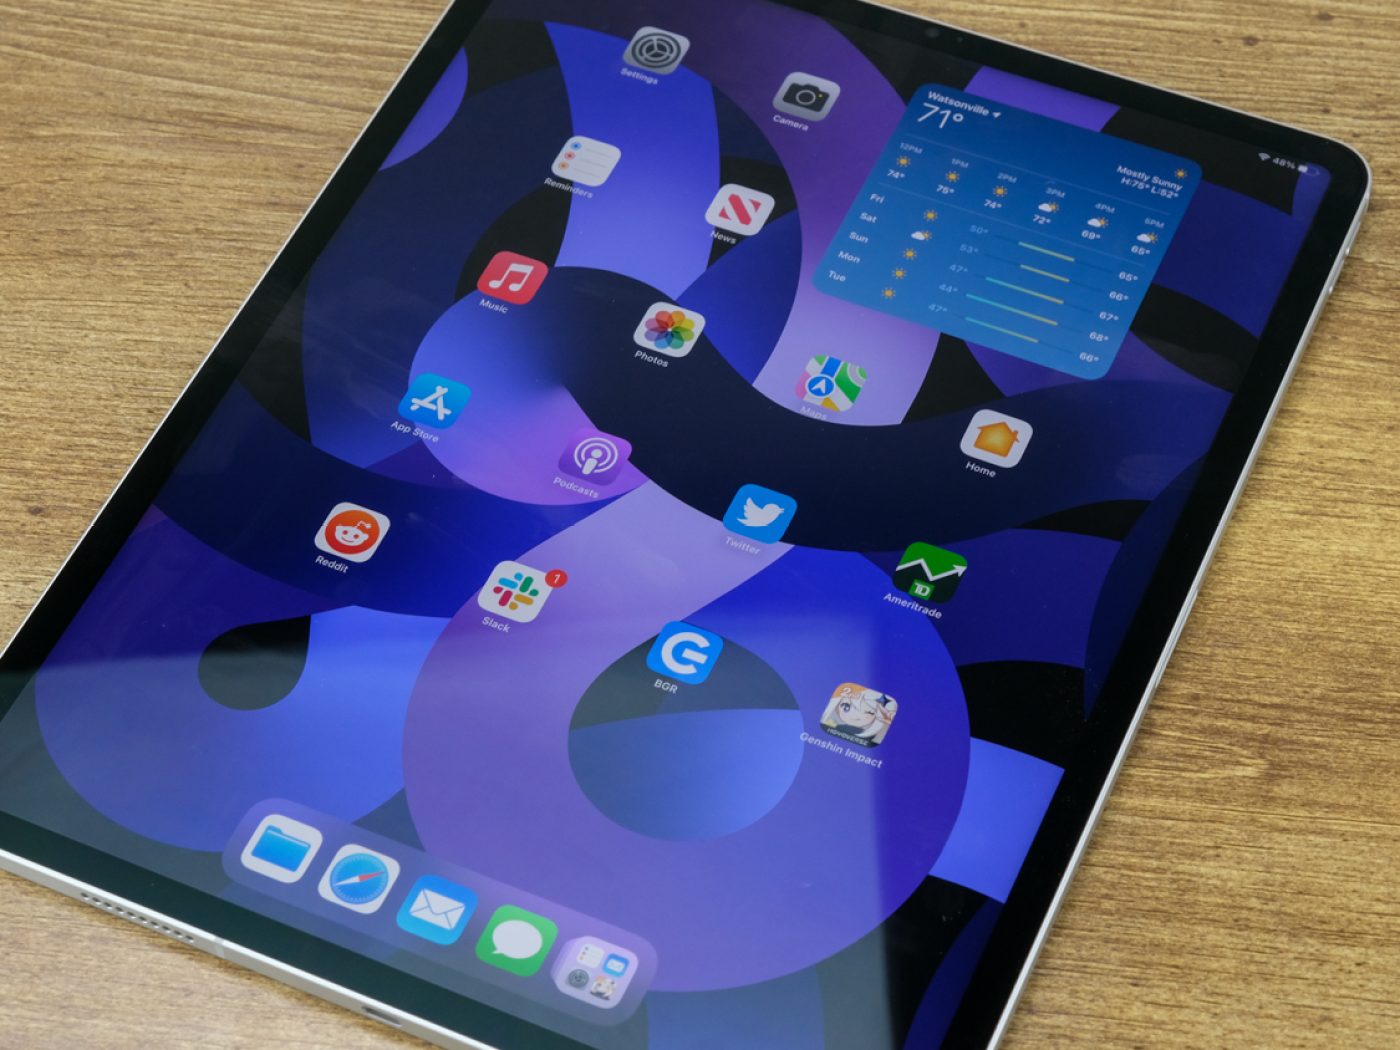 Next-gen iPad Pro's OLED screen and new Magic Keyboard might not be enough